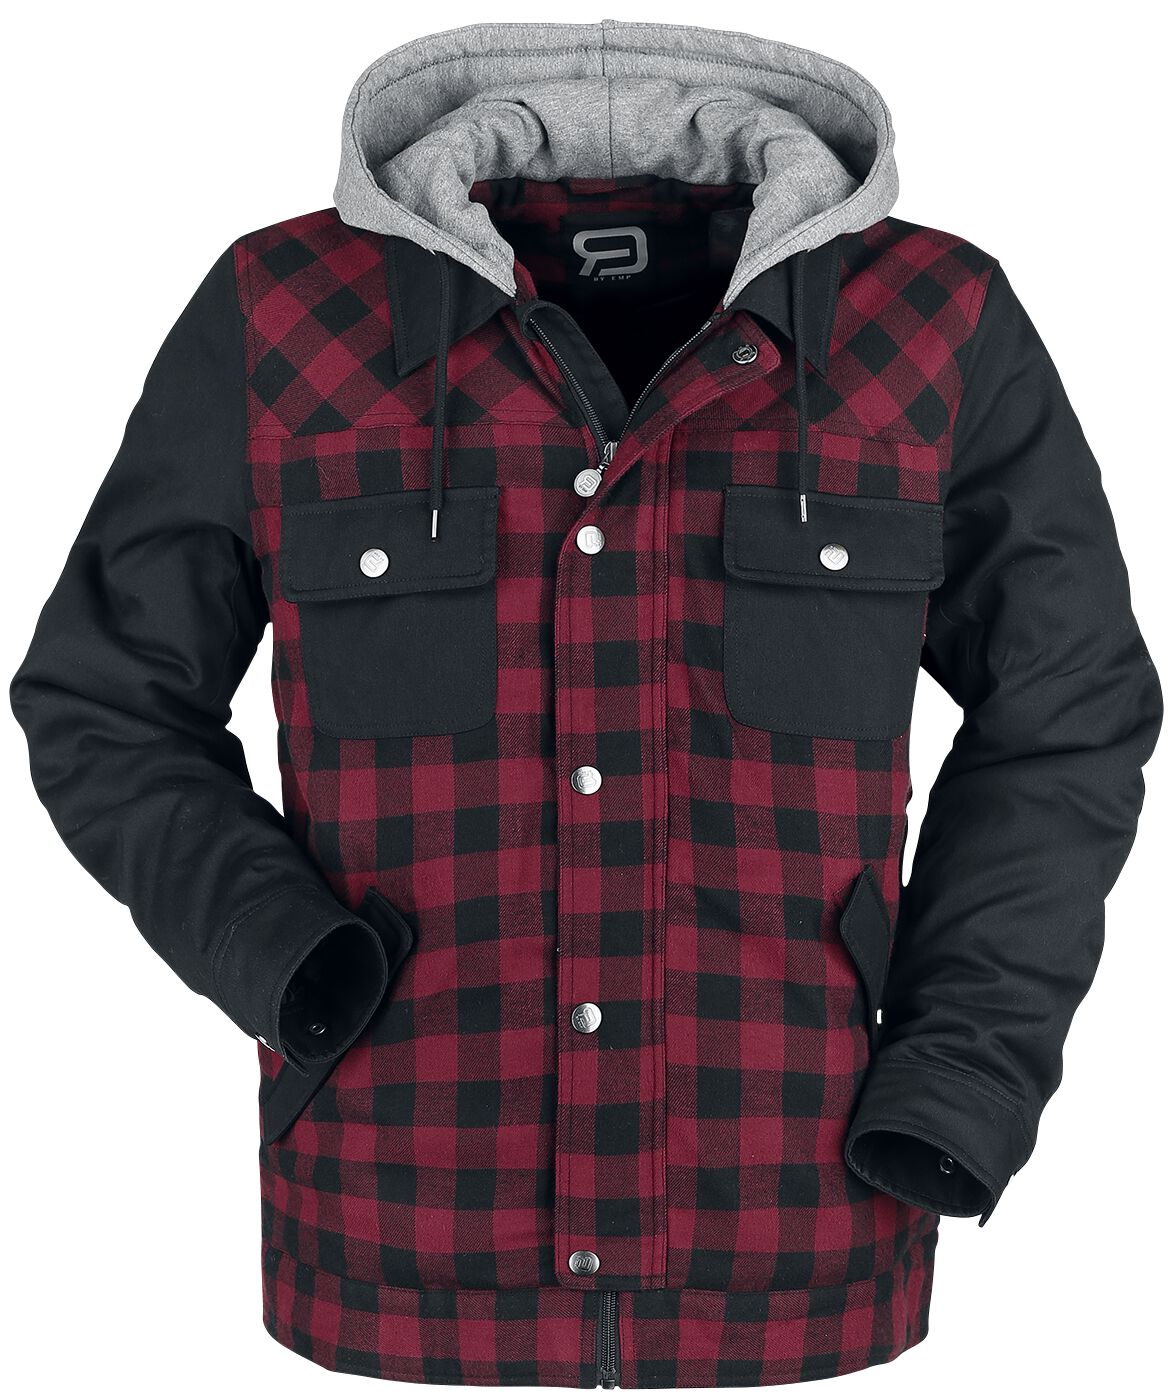 Image of Giacca invernale di RED by EMP - Black/Red Lumberjack Jacket with Black Sleeves - S a XXL - Uomo - nero/rosso